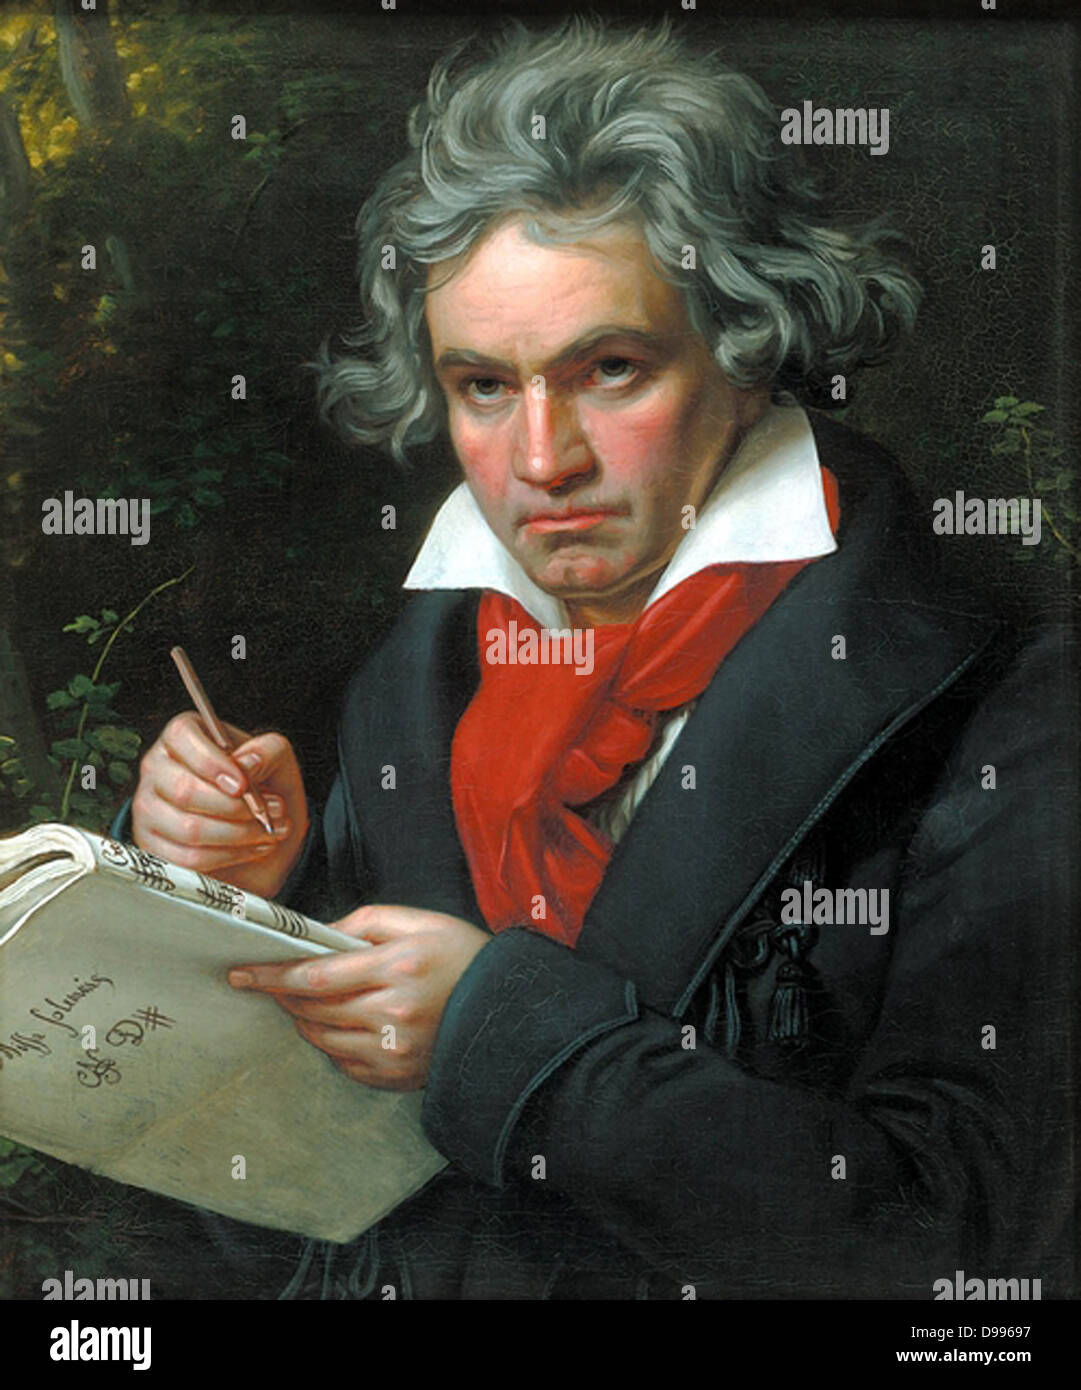 Ludwig van Beethoven (16 December 1770- 26 March 1827) was a German composer and pianist. He was a crucial figure in the transitional period between the Classical and Romantic eras in Western classical music, and remains one of the most acclaimed and influential composers of all time.   Portrait of Beethoven in 1818 by August Klöber Stock Photo